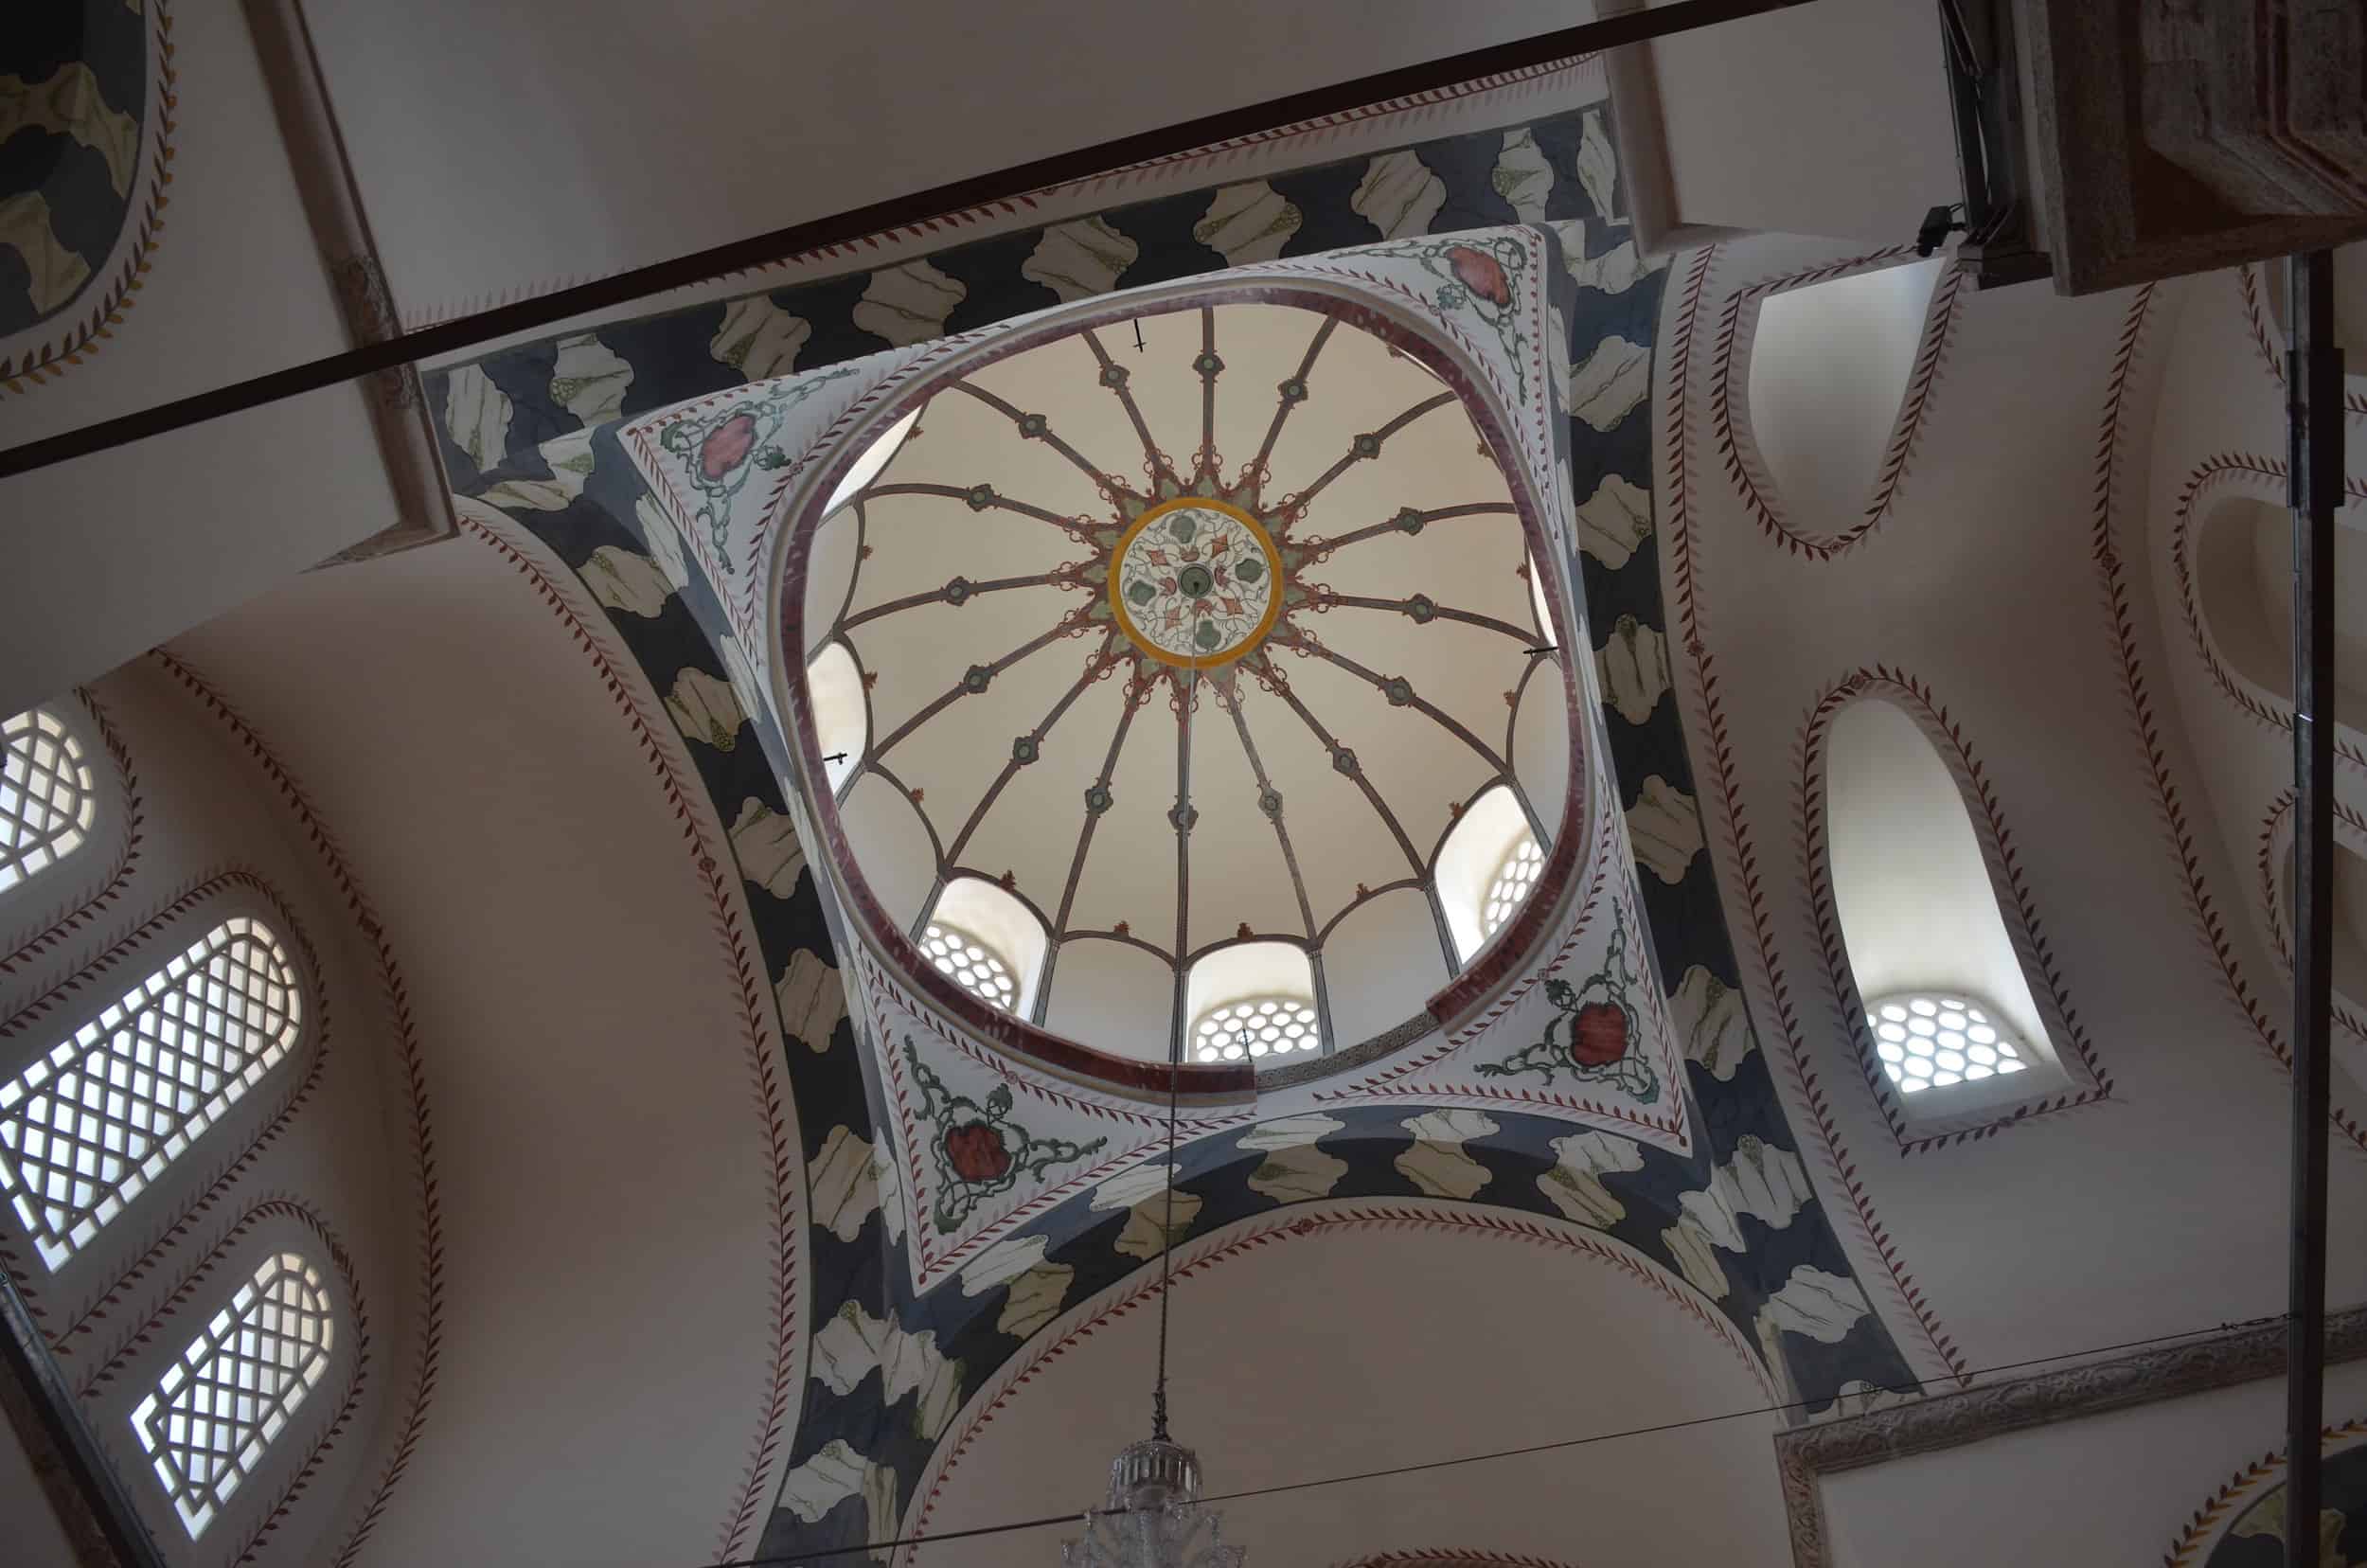 Dome of the north church of the Zeyrek Mosque in Zeyrek, Istanbul, Turkey